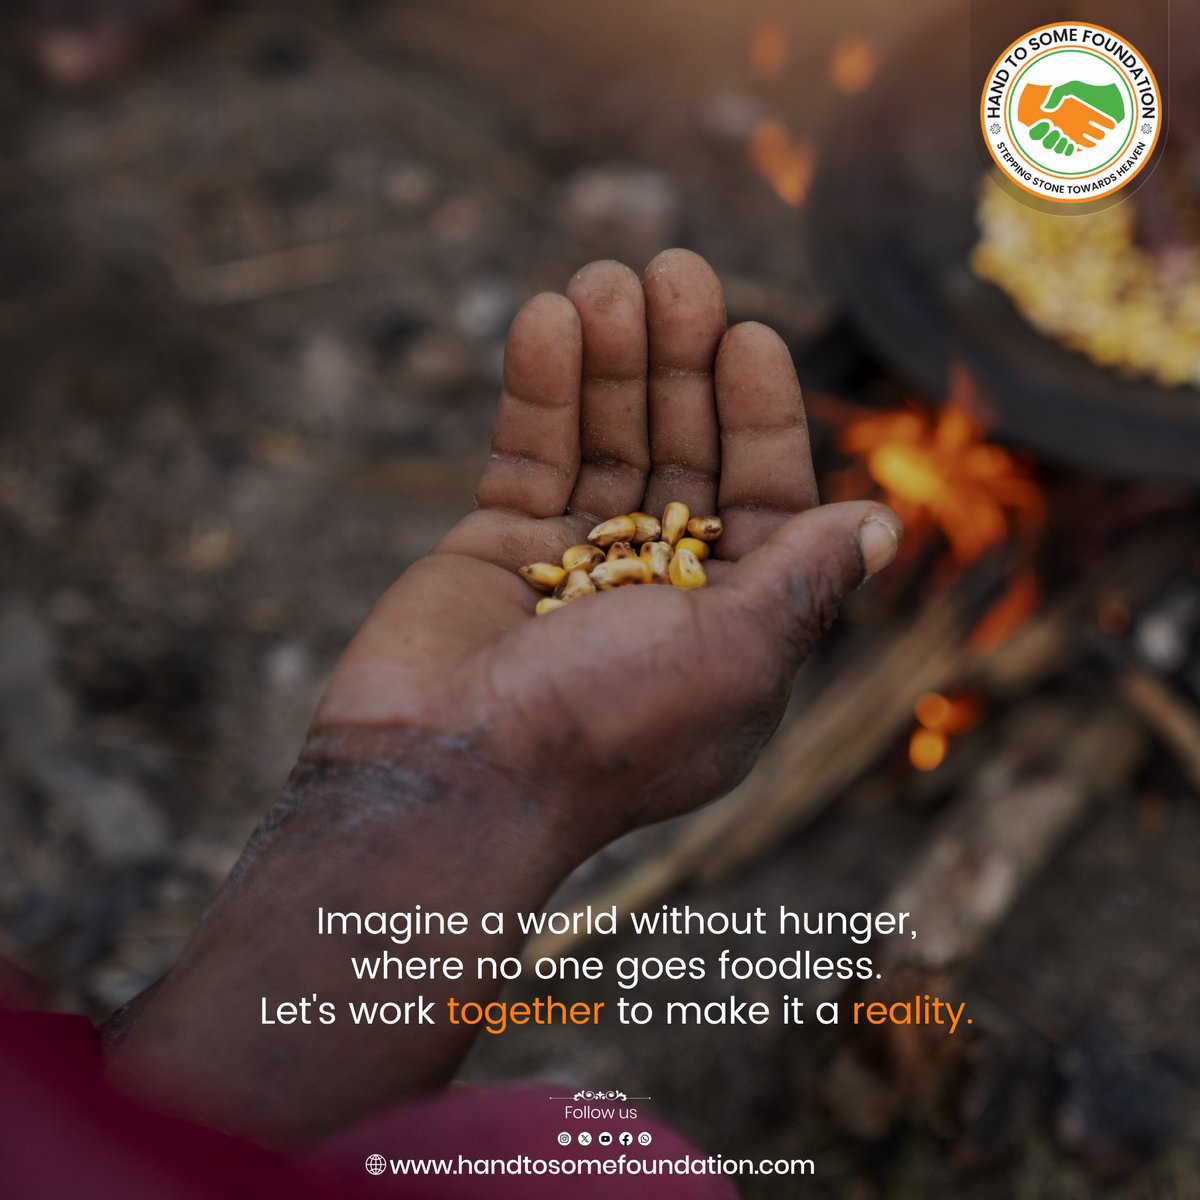 Imagine a world without hunger, where no one goes foodless. Let's work together to make it a reality. #EndHunger #FoodForAll #handtosomefoundation